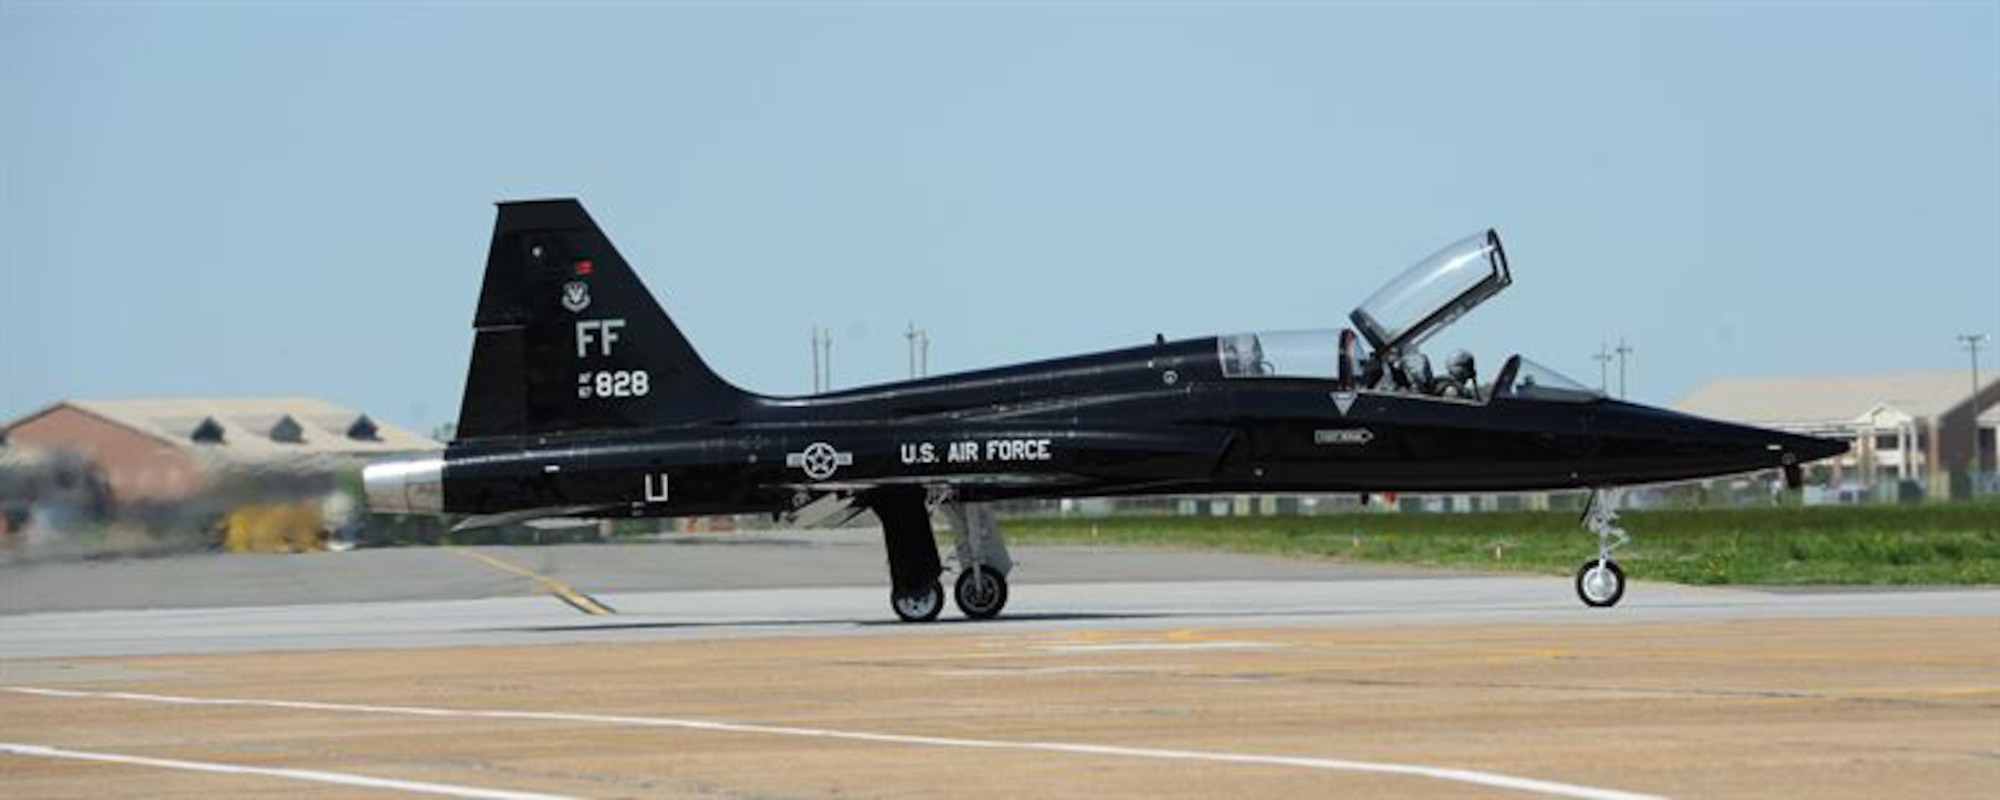 A T-38 Talon taxis down the runway at Langley Air Force Base, Va., March 26, 2012. The T-38s typically fly twice daily to provide adversary support at a fraction of the operational costs of other aircraft. (U.S. Air Force photo by Airman 1st Class Teresa Cleveland/Released)